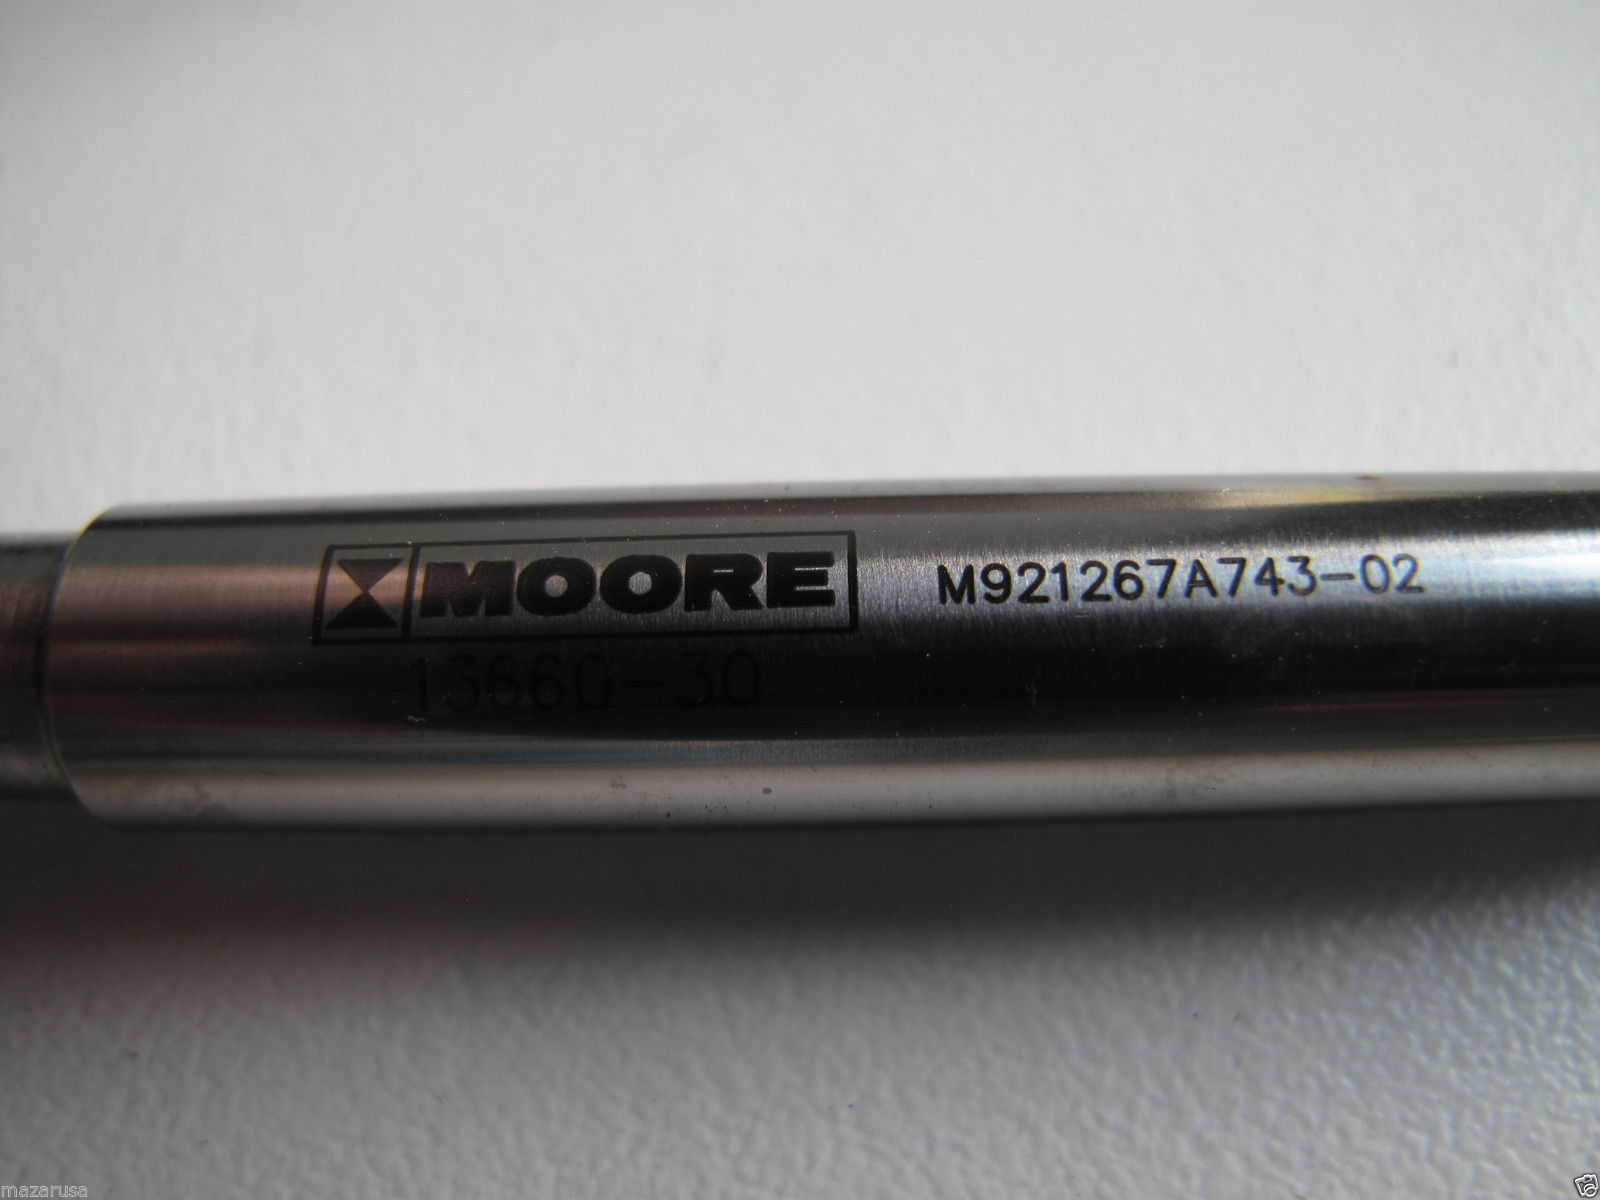 Moore 13660-30 Linear Transducer Probe Gauge Sensor, MOORE M921267A743-02, NEW DIAGNOSTIC ULTRASOUND MACHINES FOR SALE